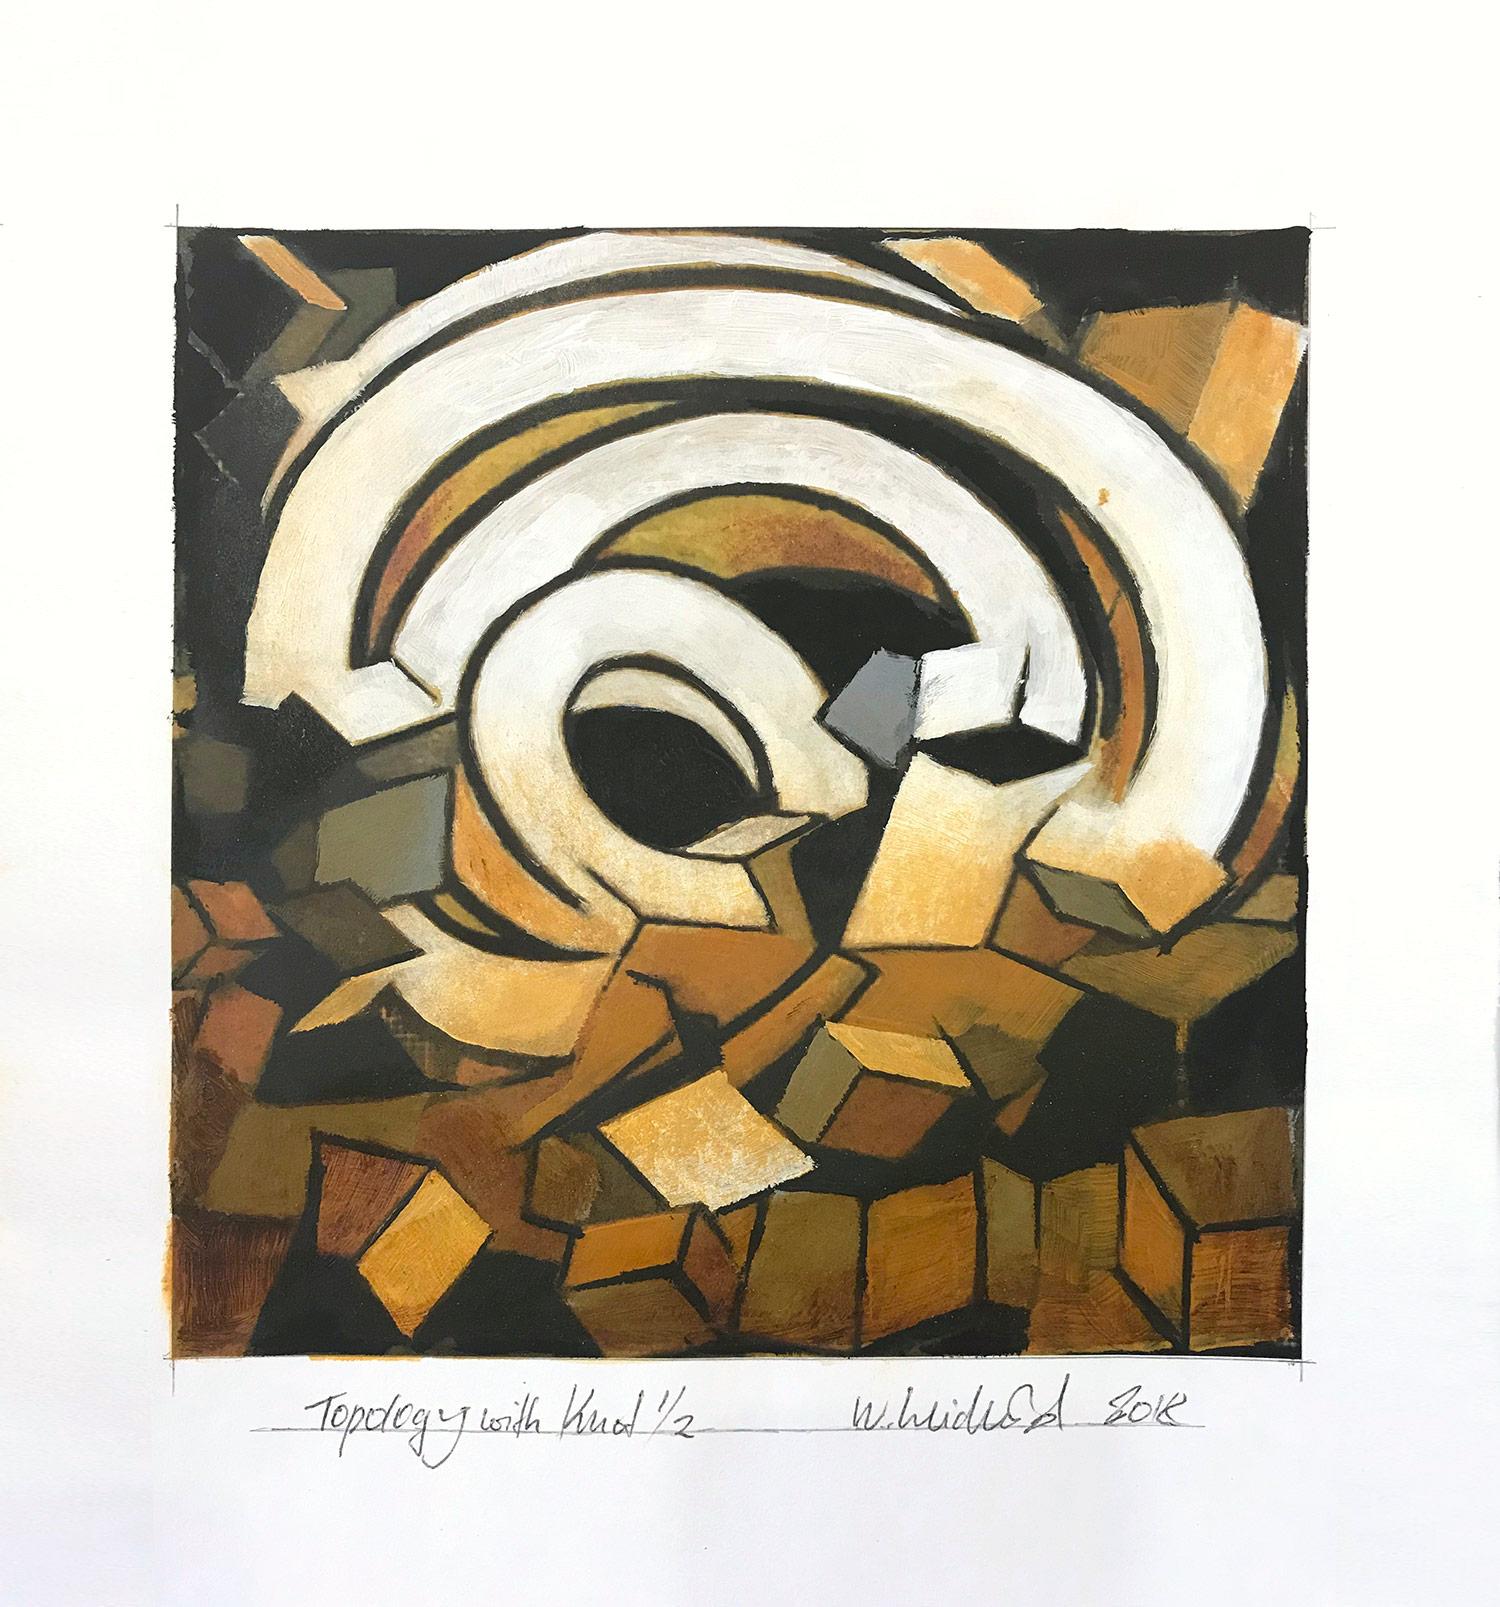 Wolfgang Leidhold Abstract Painting - "Topology with Knot 1/2" Abstract Representational Knot Painting Work on Paper